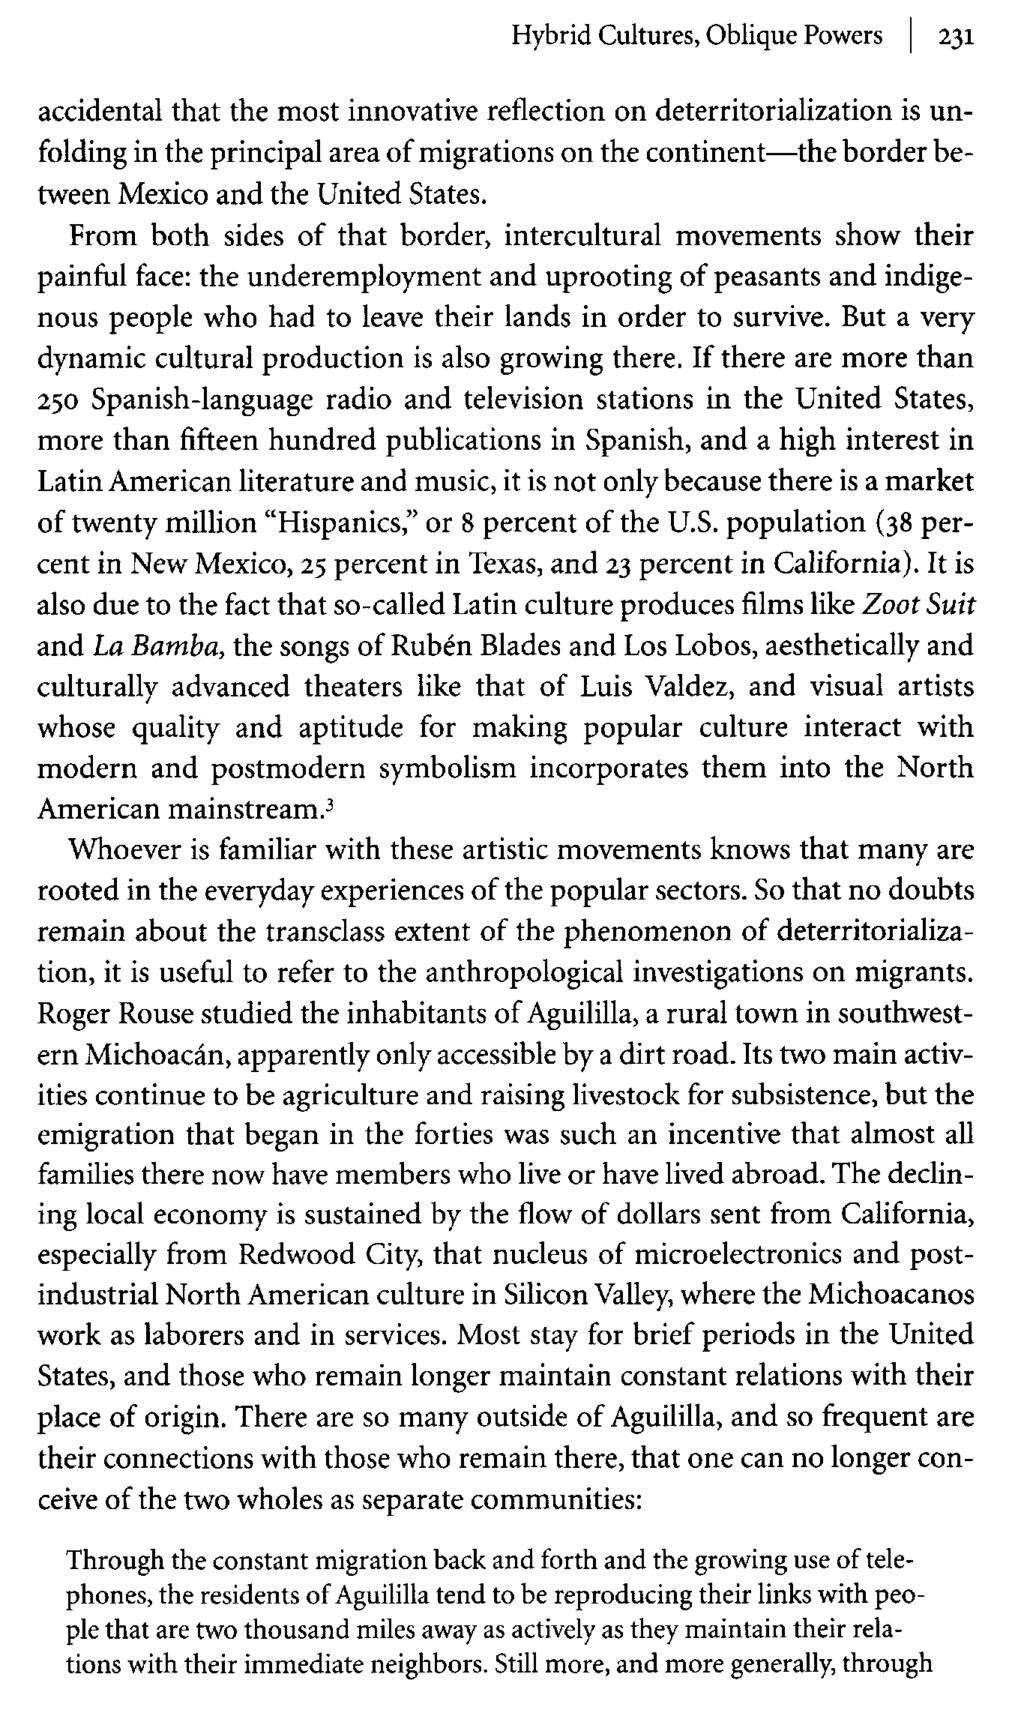 Hybrid Cultures, Oblique Powers 231 accidental that the most innovative reflection on deterritorialization is unfolding in the principal area of migrations on the continent the border between Mexico